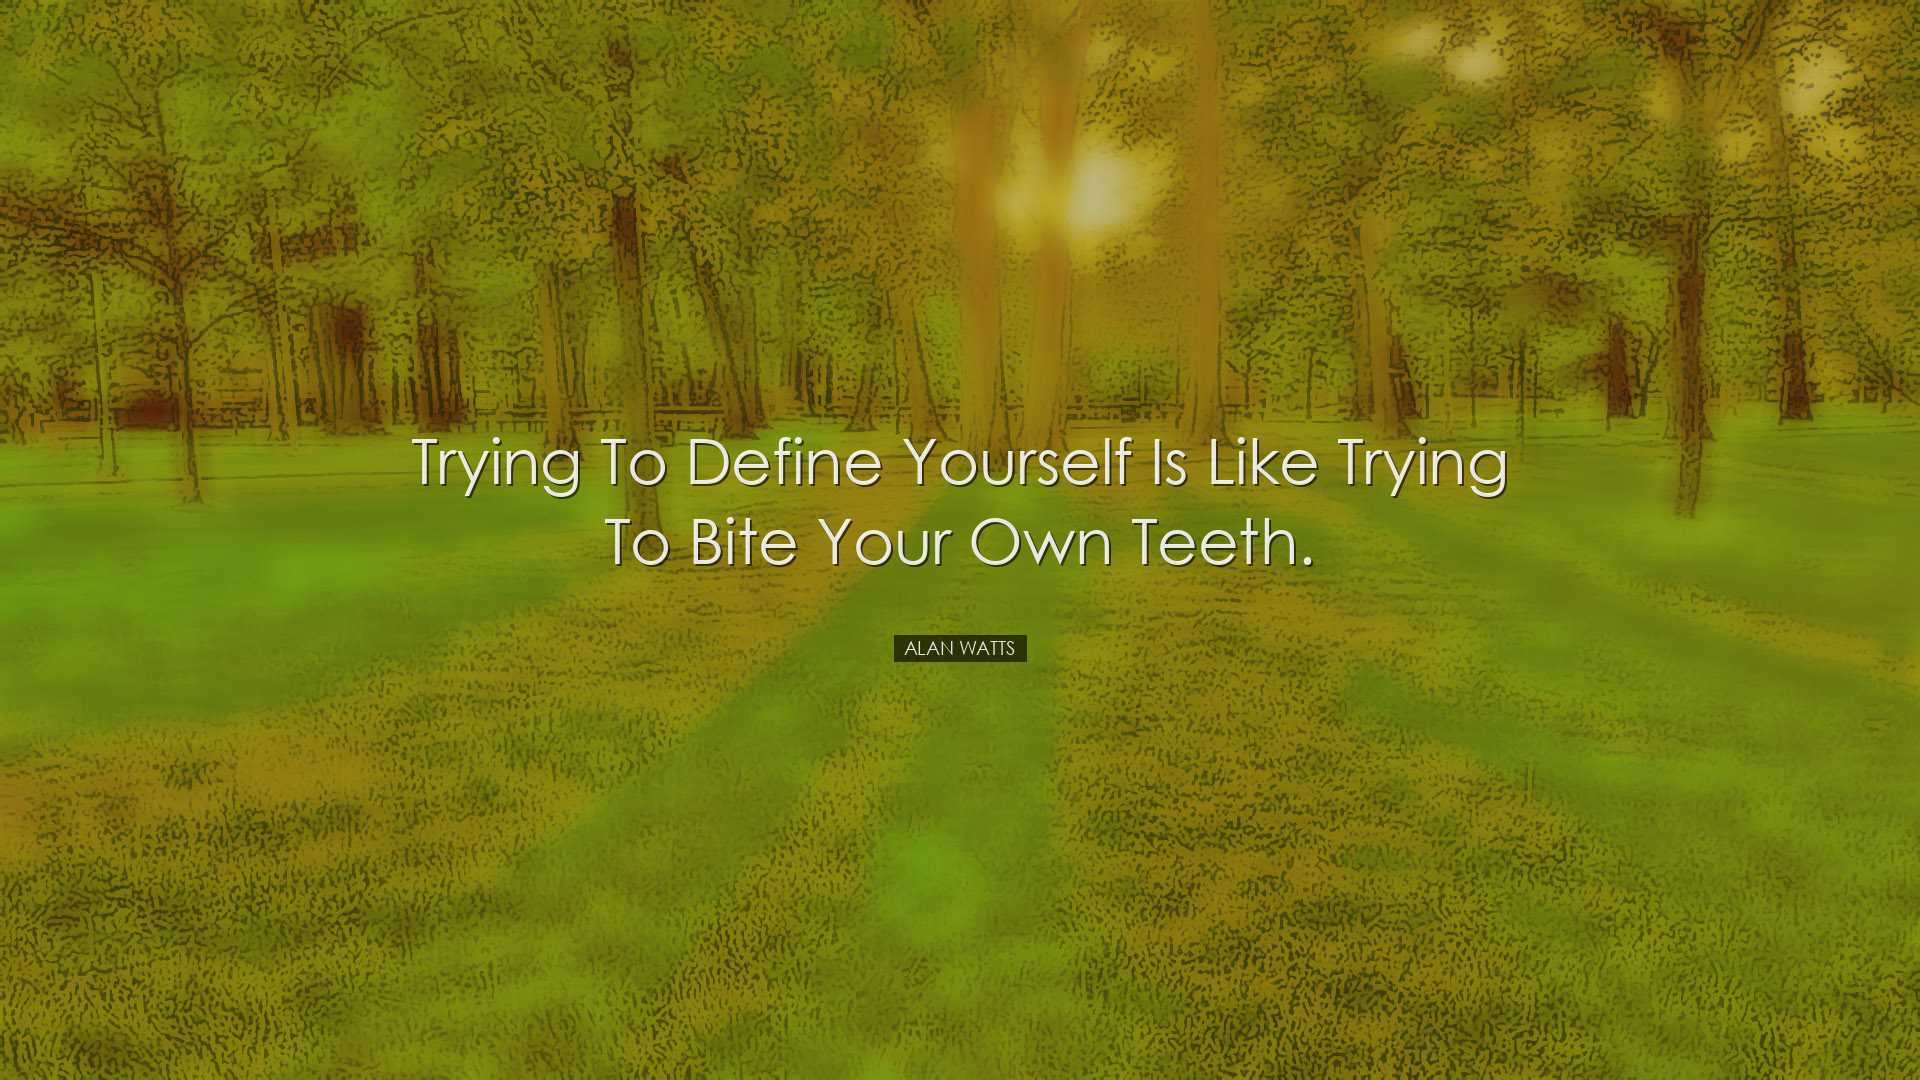 Trying to define yourself is like trying to bite your own teeth. -